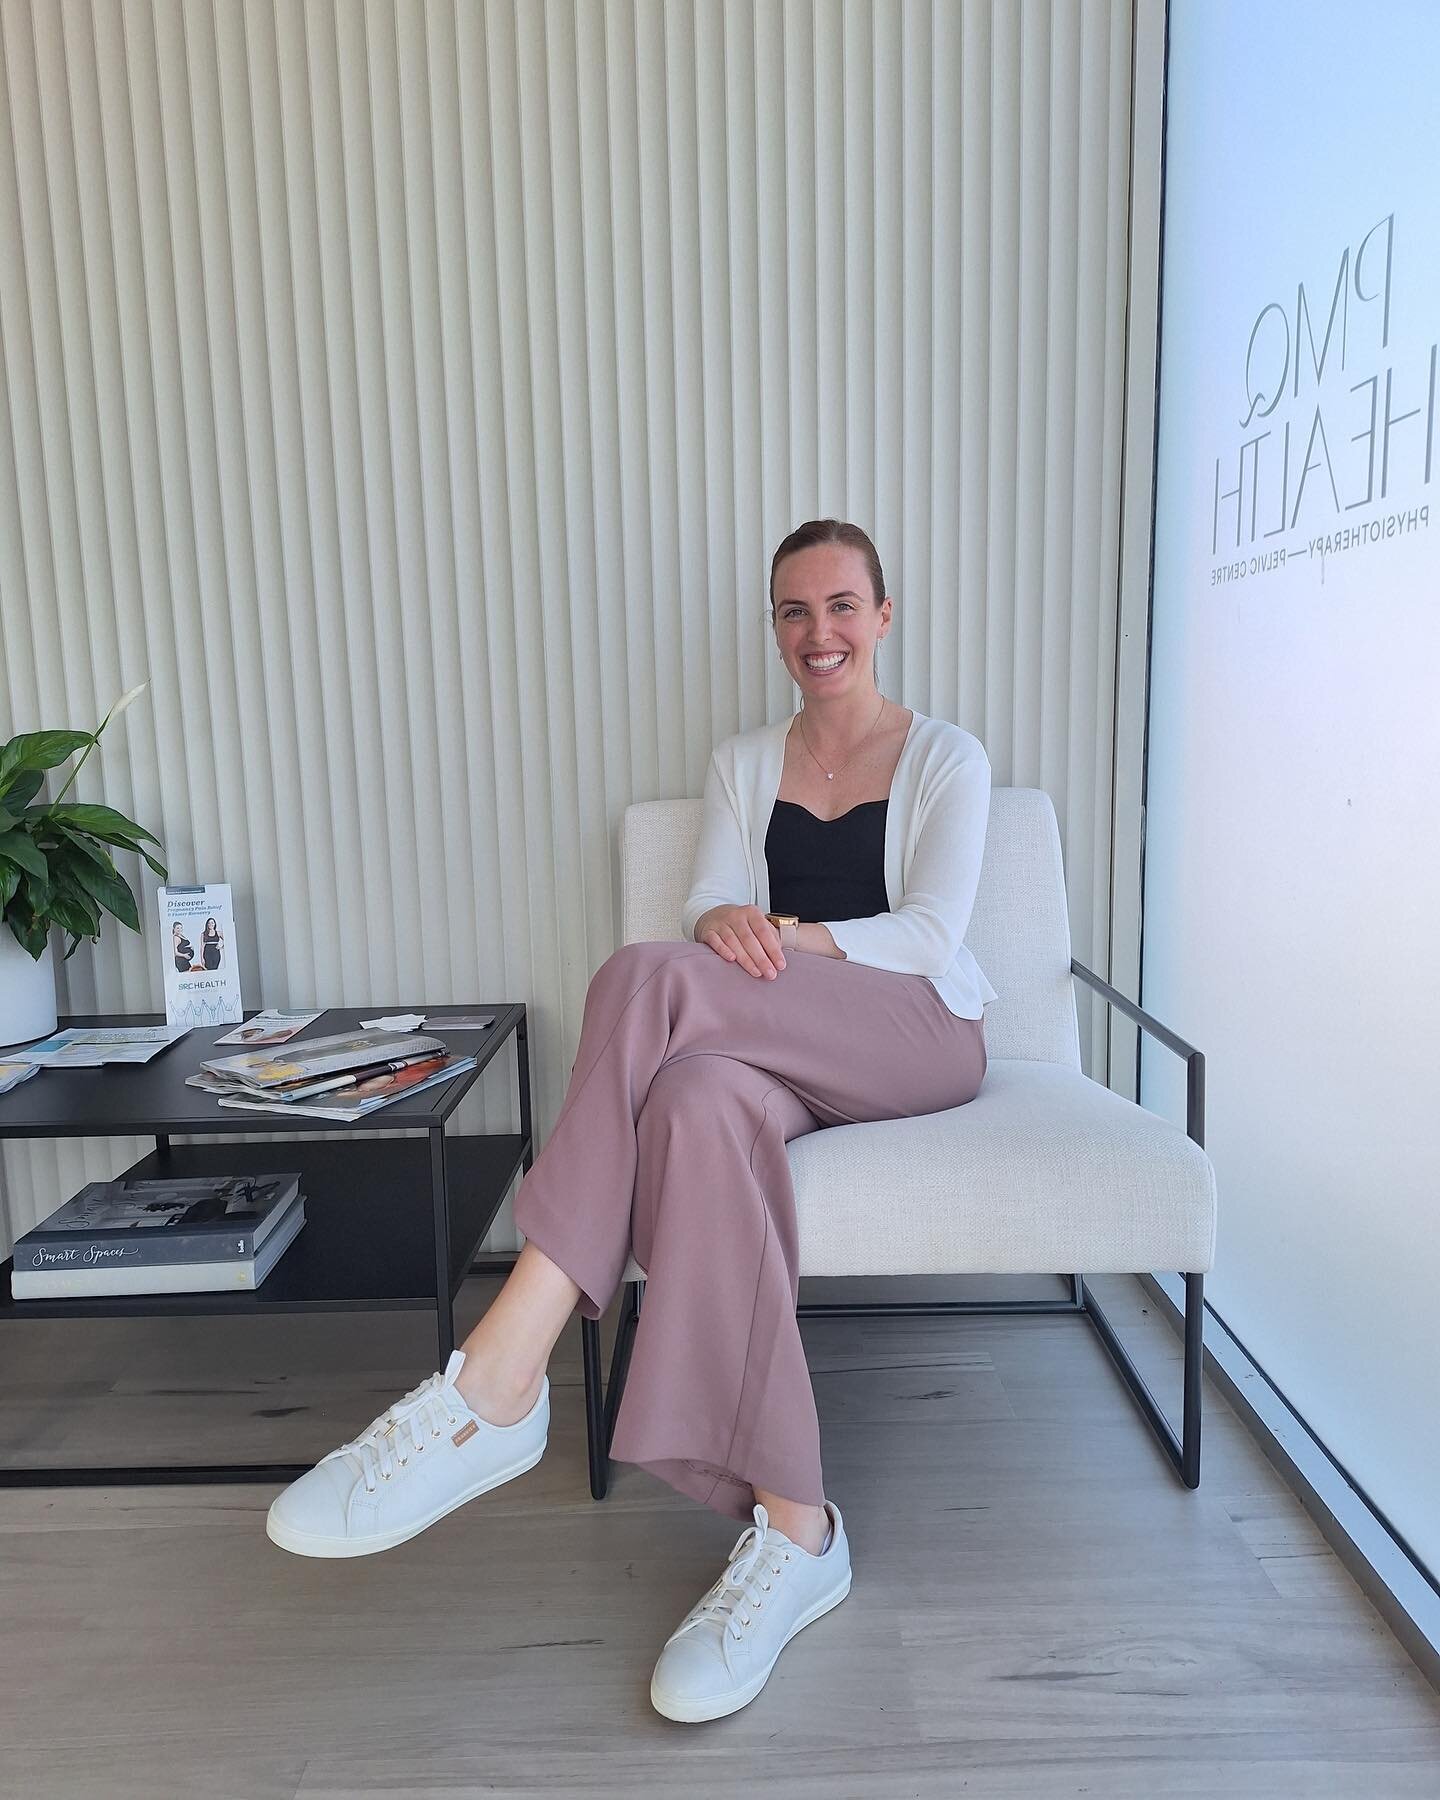 Welcome to PMQ Health Kirsty!

Kirsty is a Pelvic Health and Musculoskeletal Physiotherapist with many years of experience.

We are beyond excited to have her apart of our team

To Book in with Kirsty you can contact our practice on 5564 1515 or head